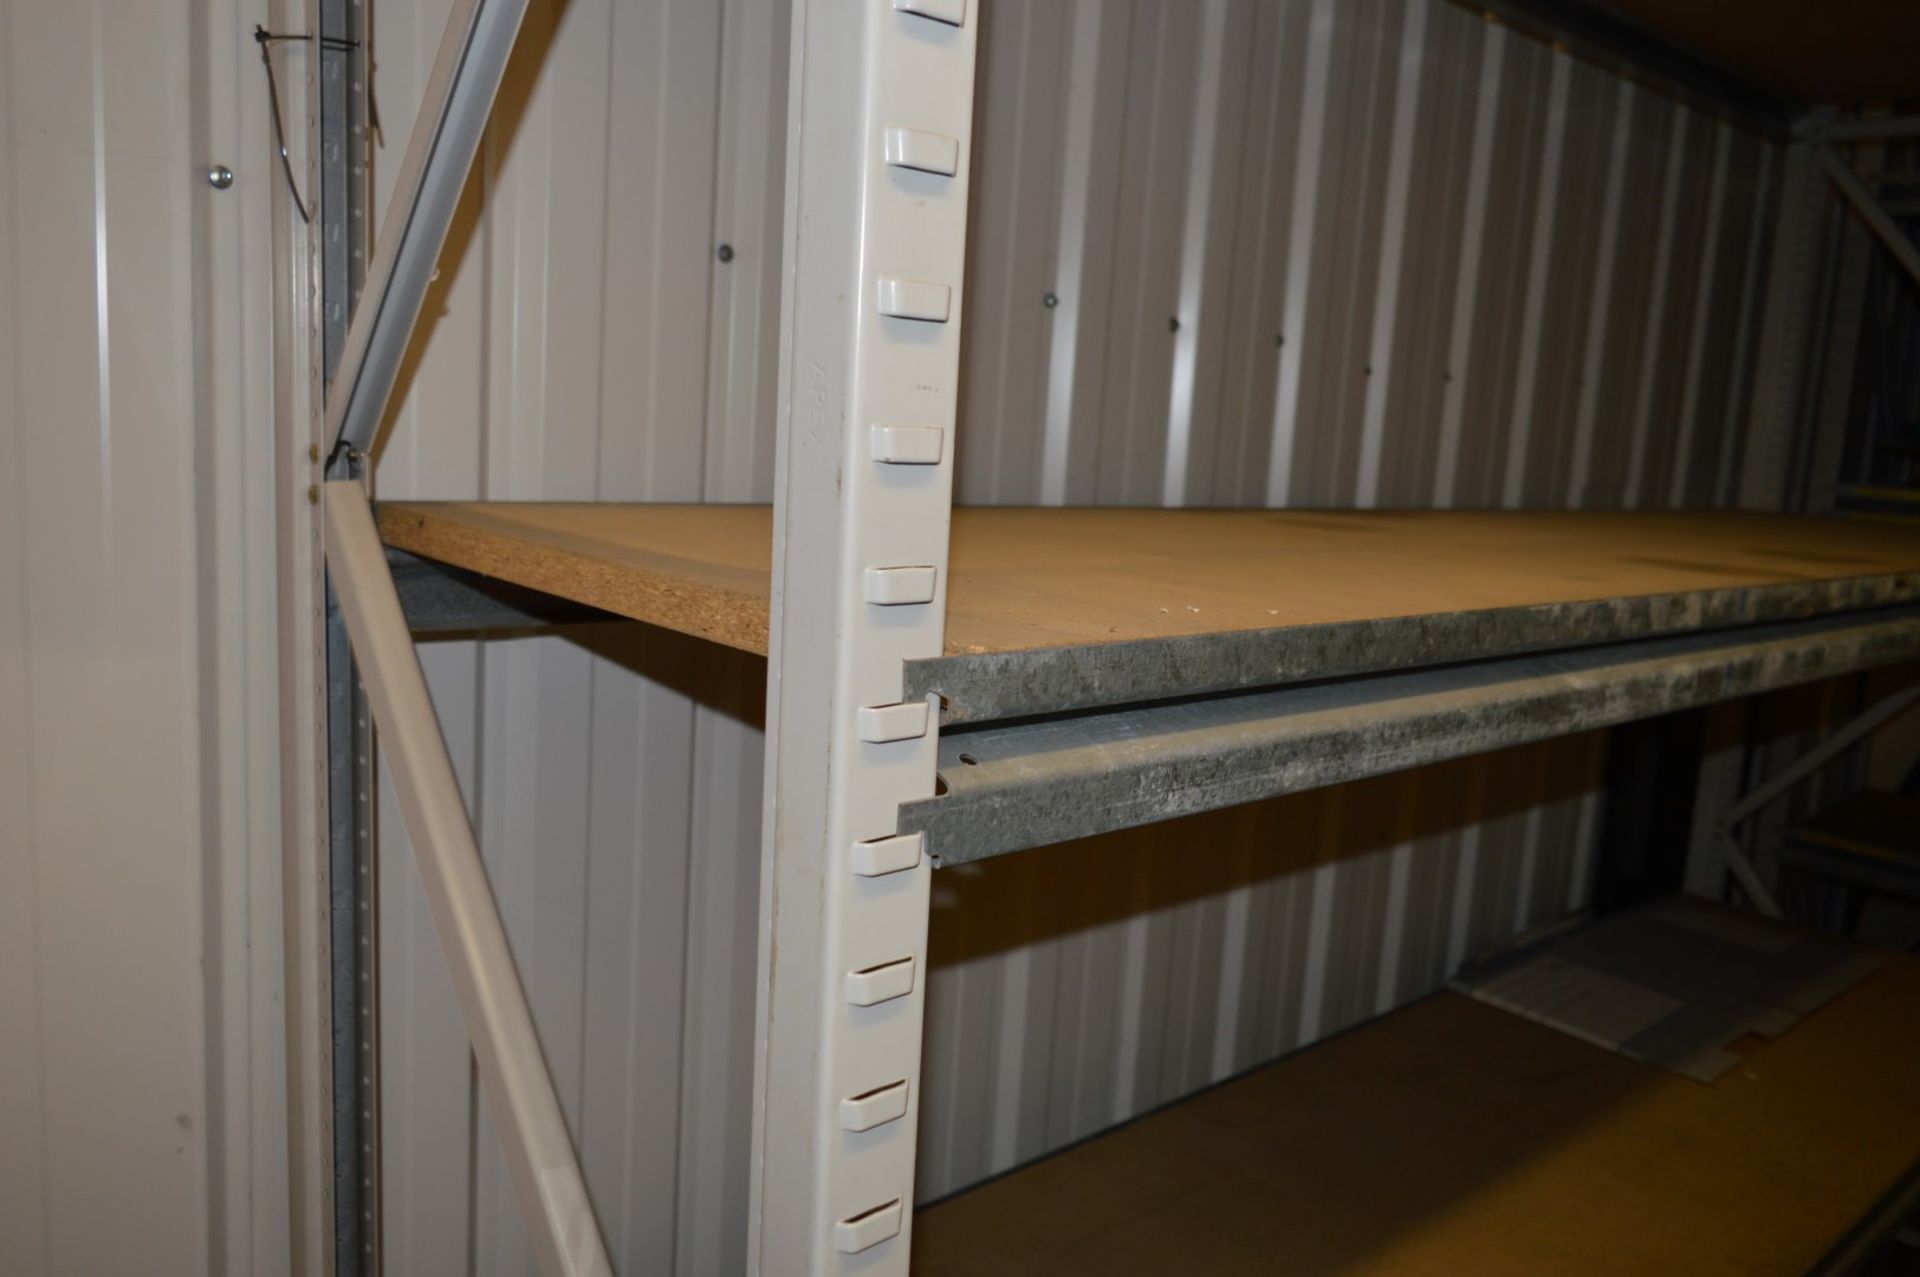 1 x Large Quantity of Heavy Duty Rivet Storage Racking - Grey Finish - Includes 6 Uprights and 18 - Image 5 of 8